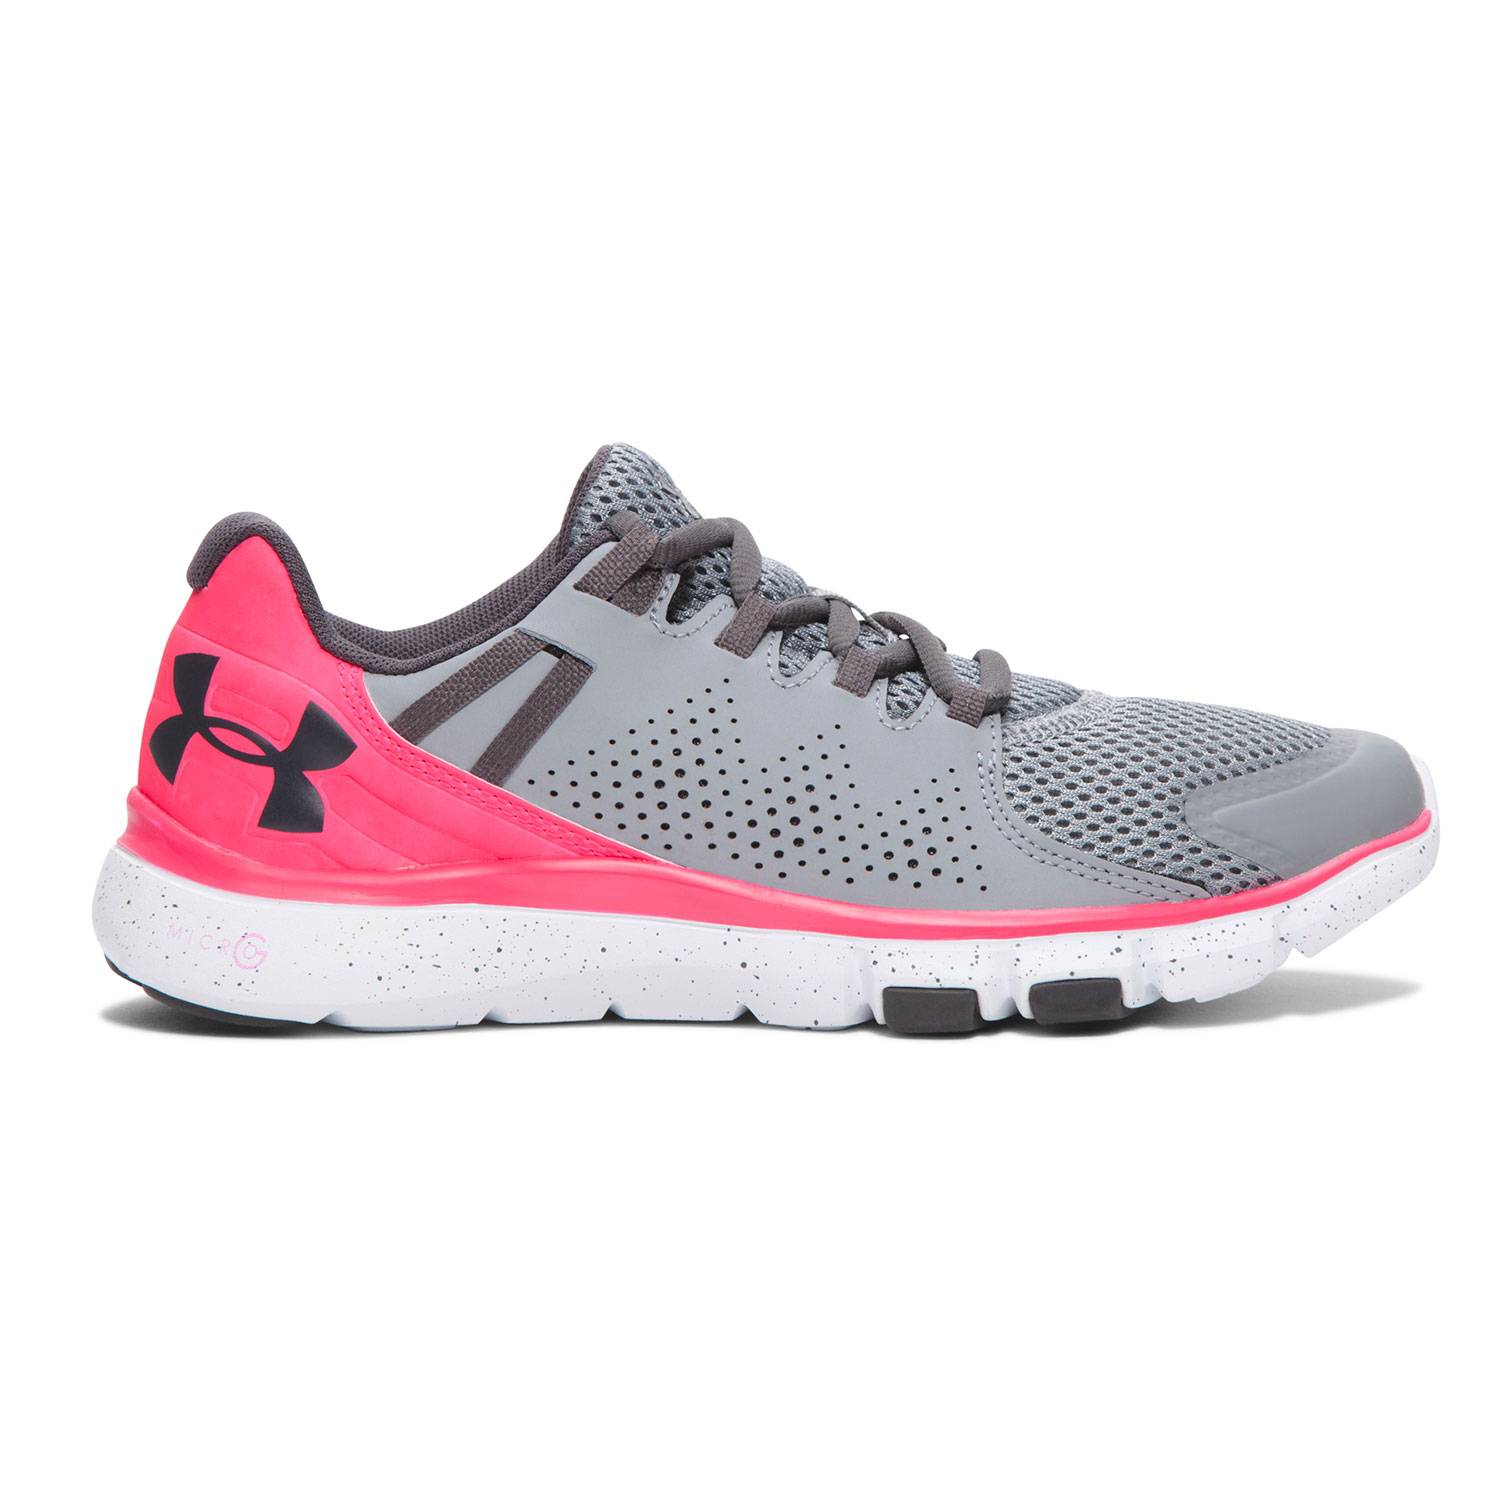 UNDER ARMOUR WOMENS MICRO G LIMITLESS TRAINERS